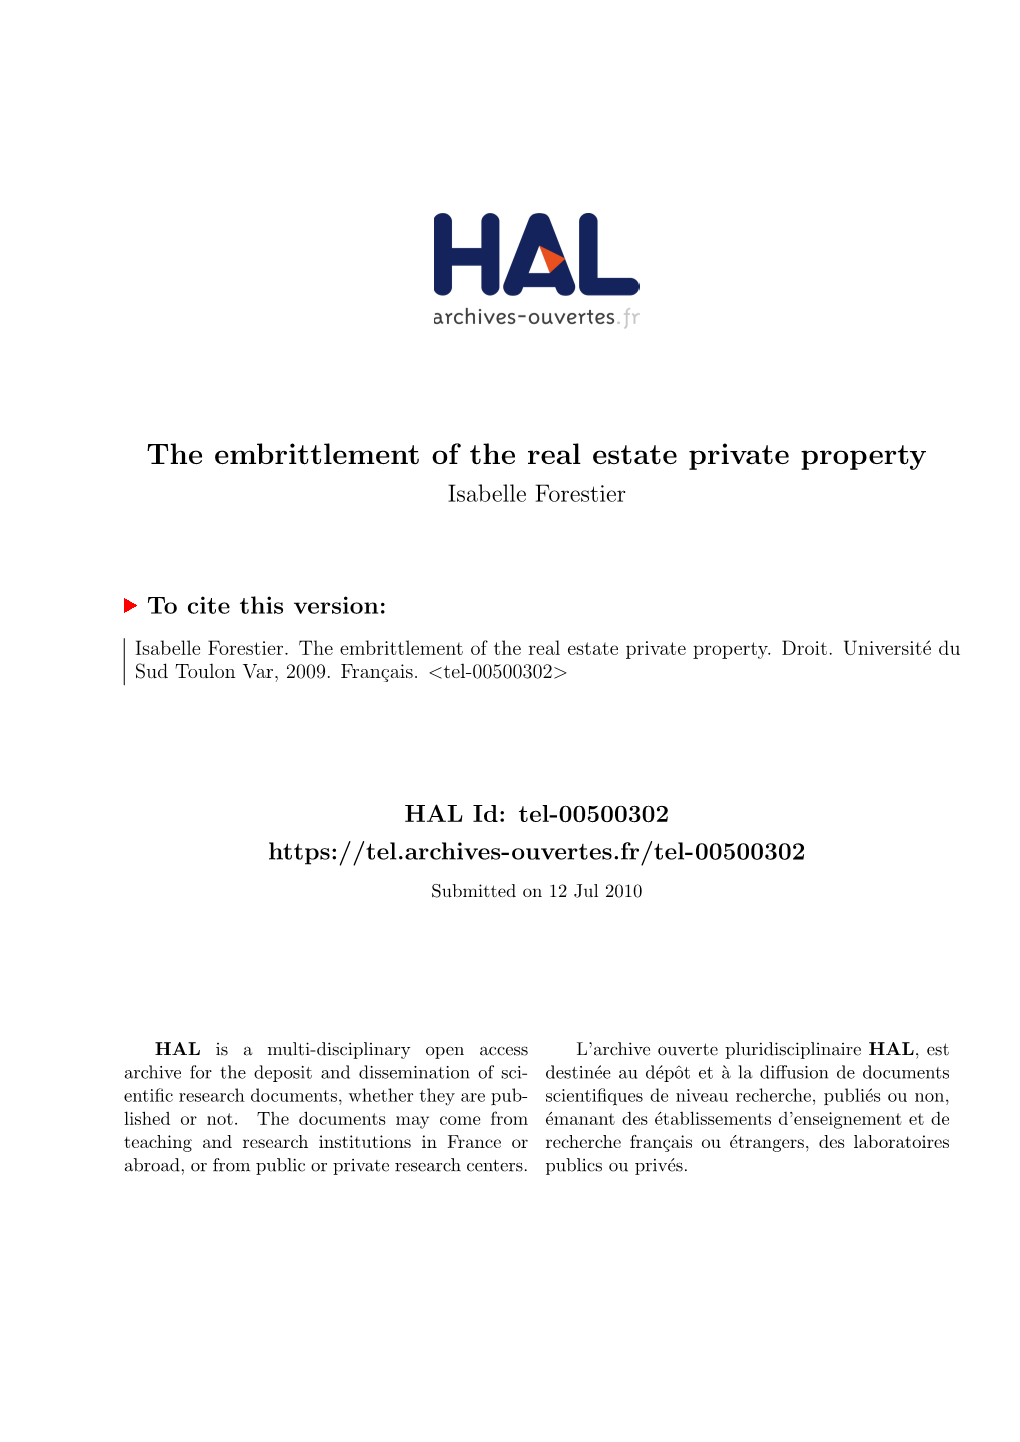 The Embrittlement of the Real Estate Private Property Isabelle Forestier